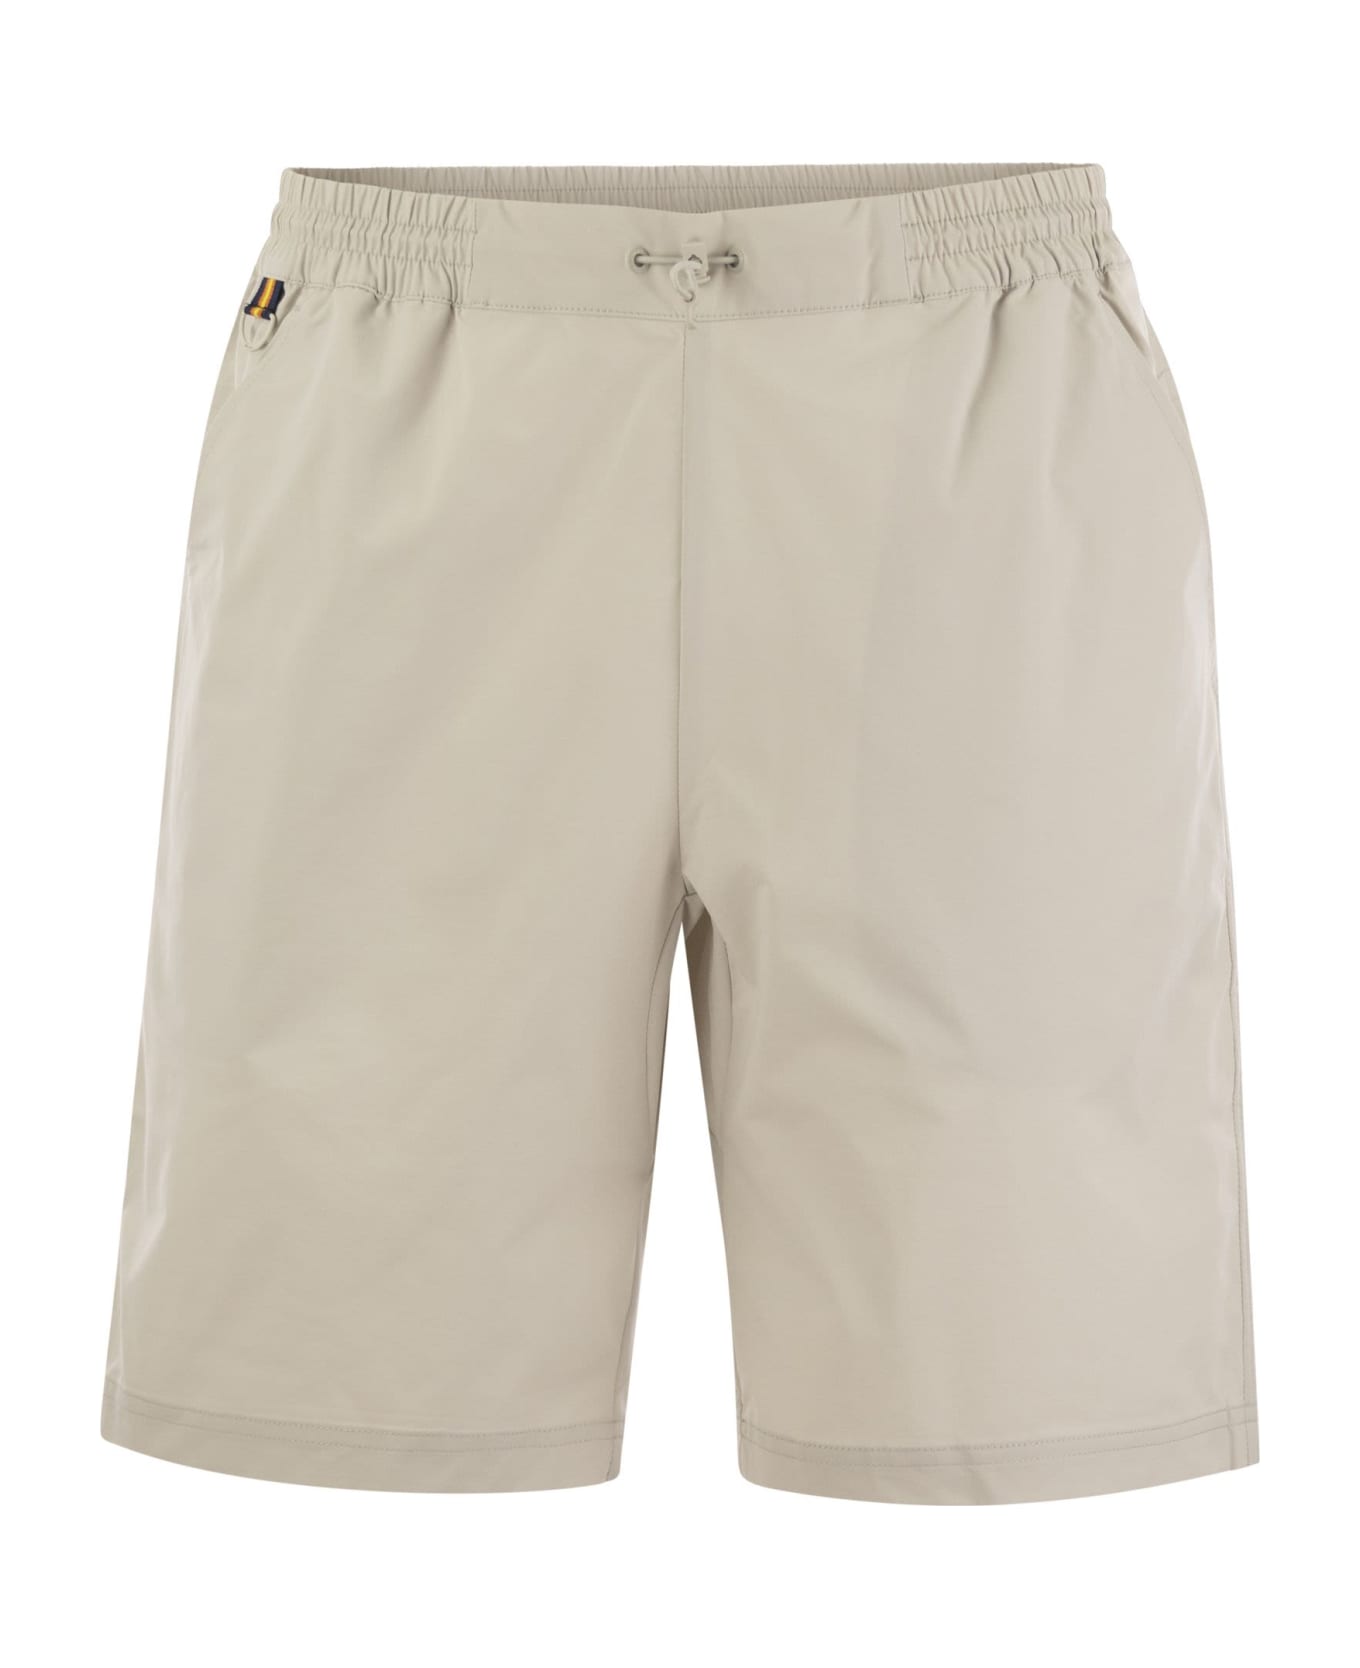 K-Way Remisen - Shorts In Technical Fabric - Beige